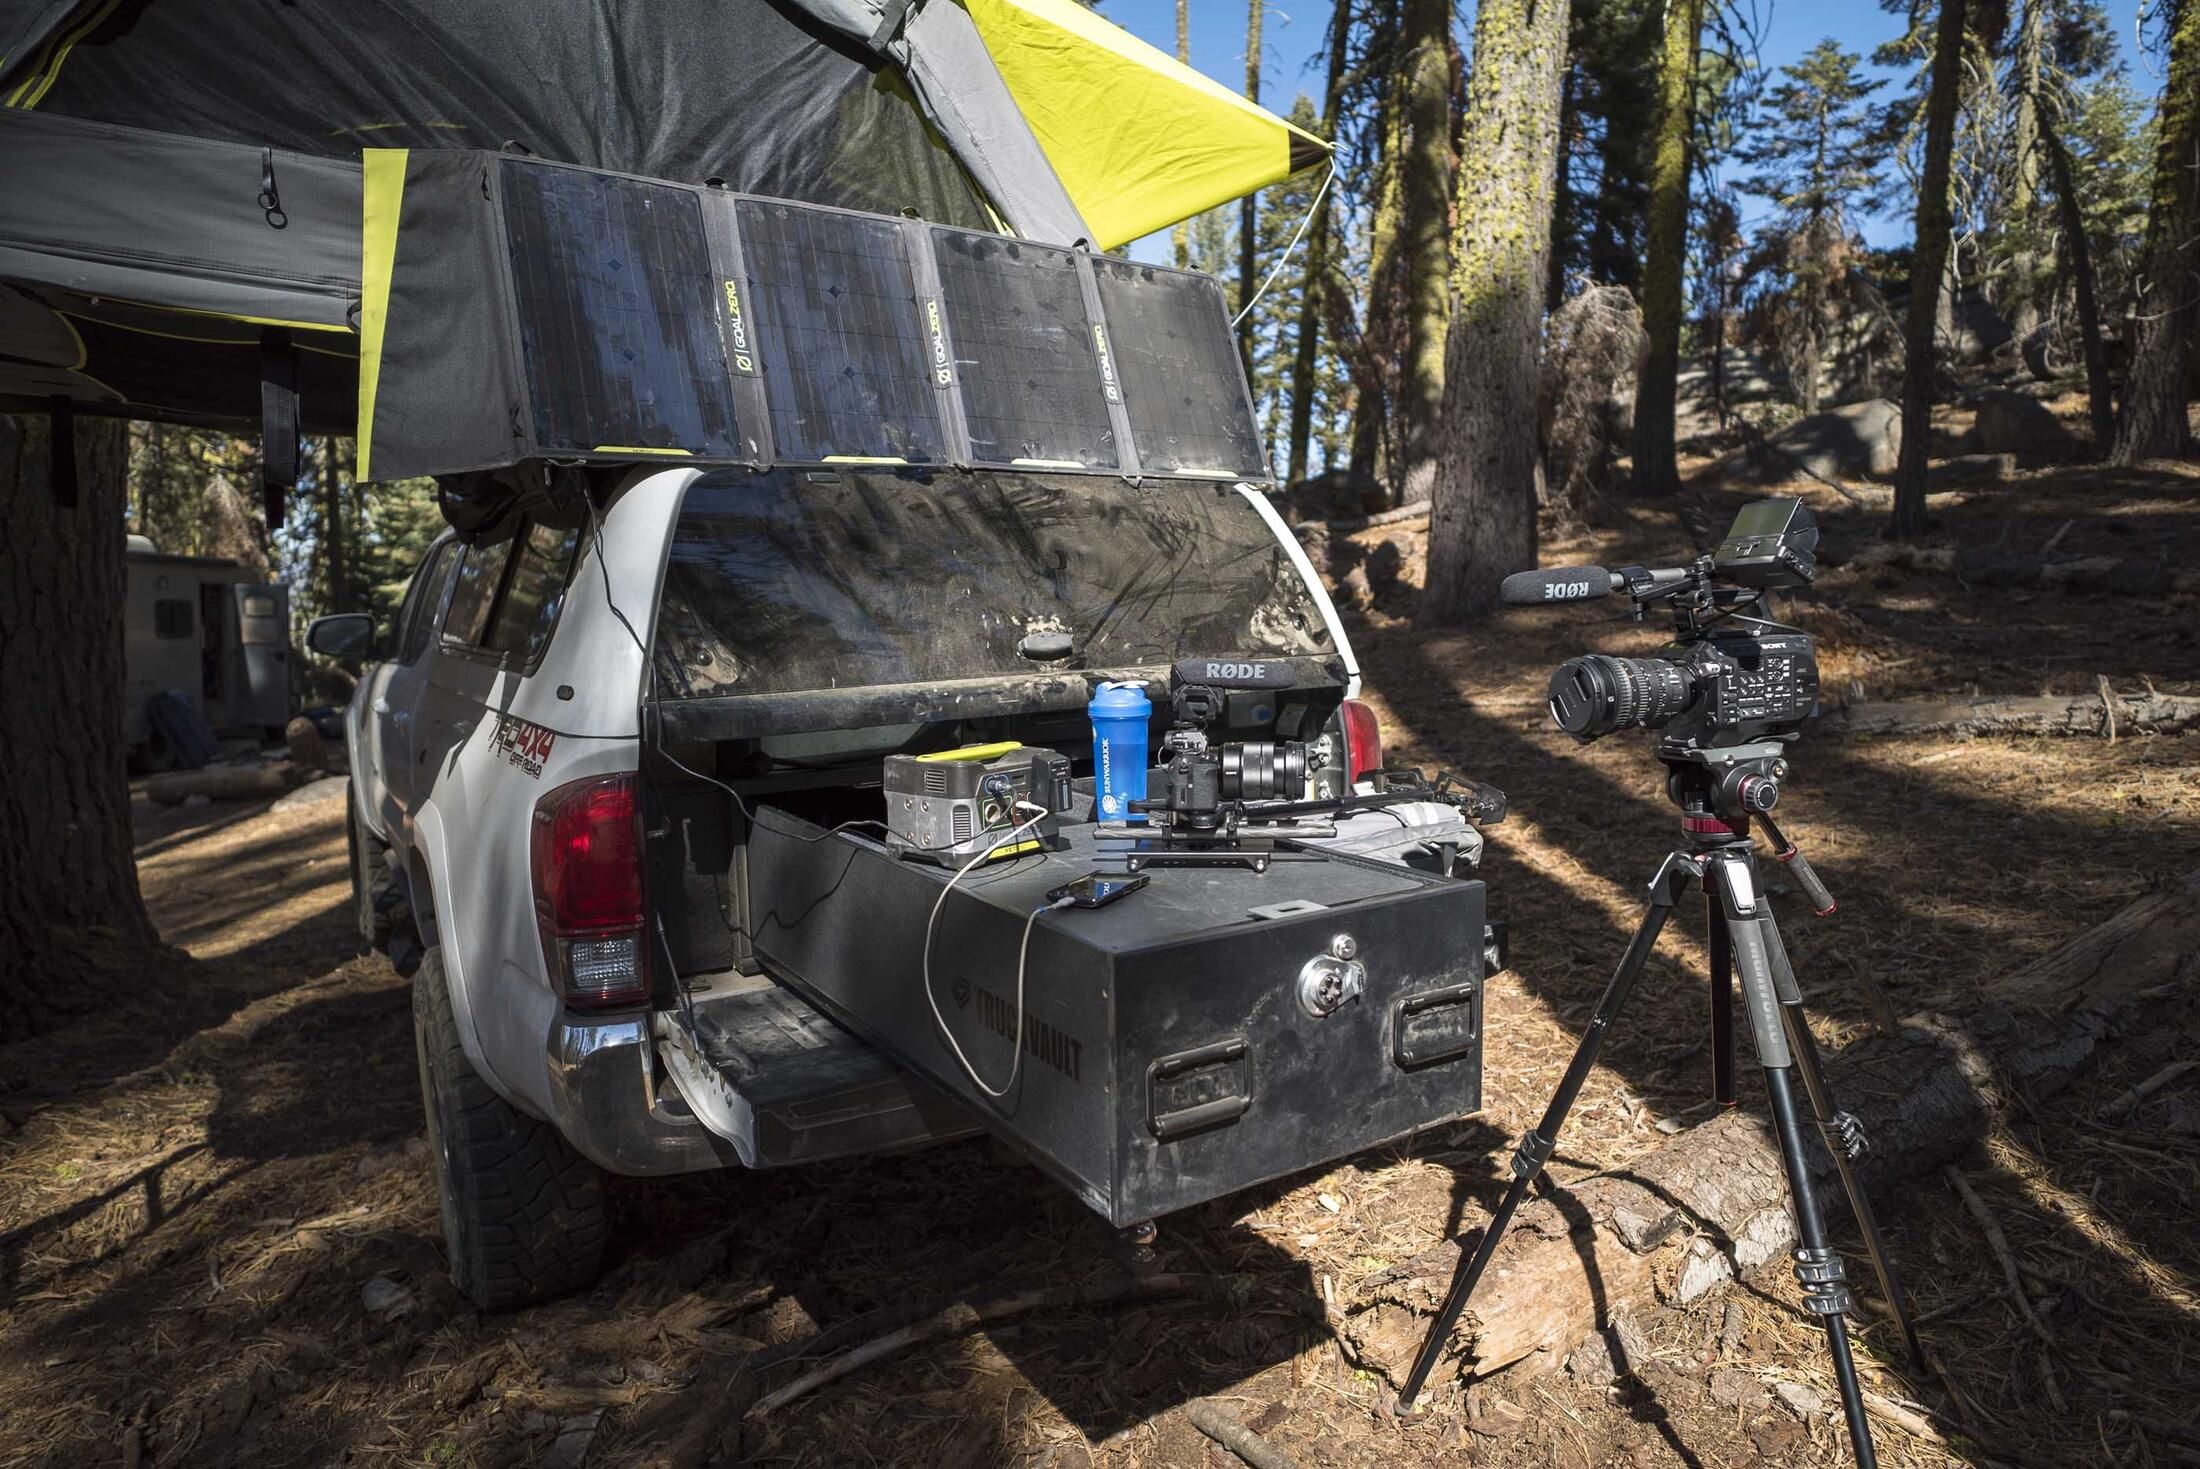 A white Toyota Tundra parked in the woods with a TruckVault filled with camera equipment.